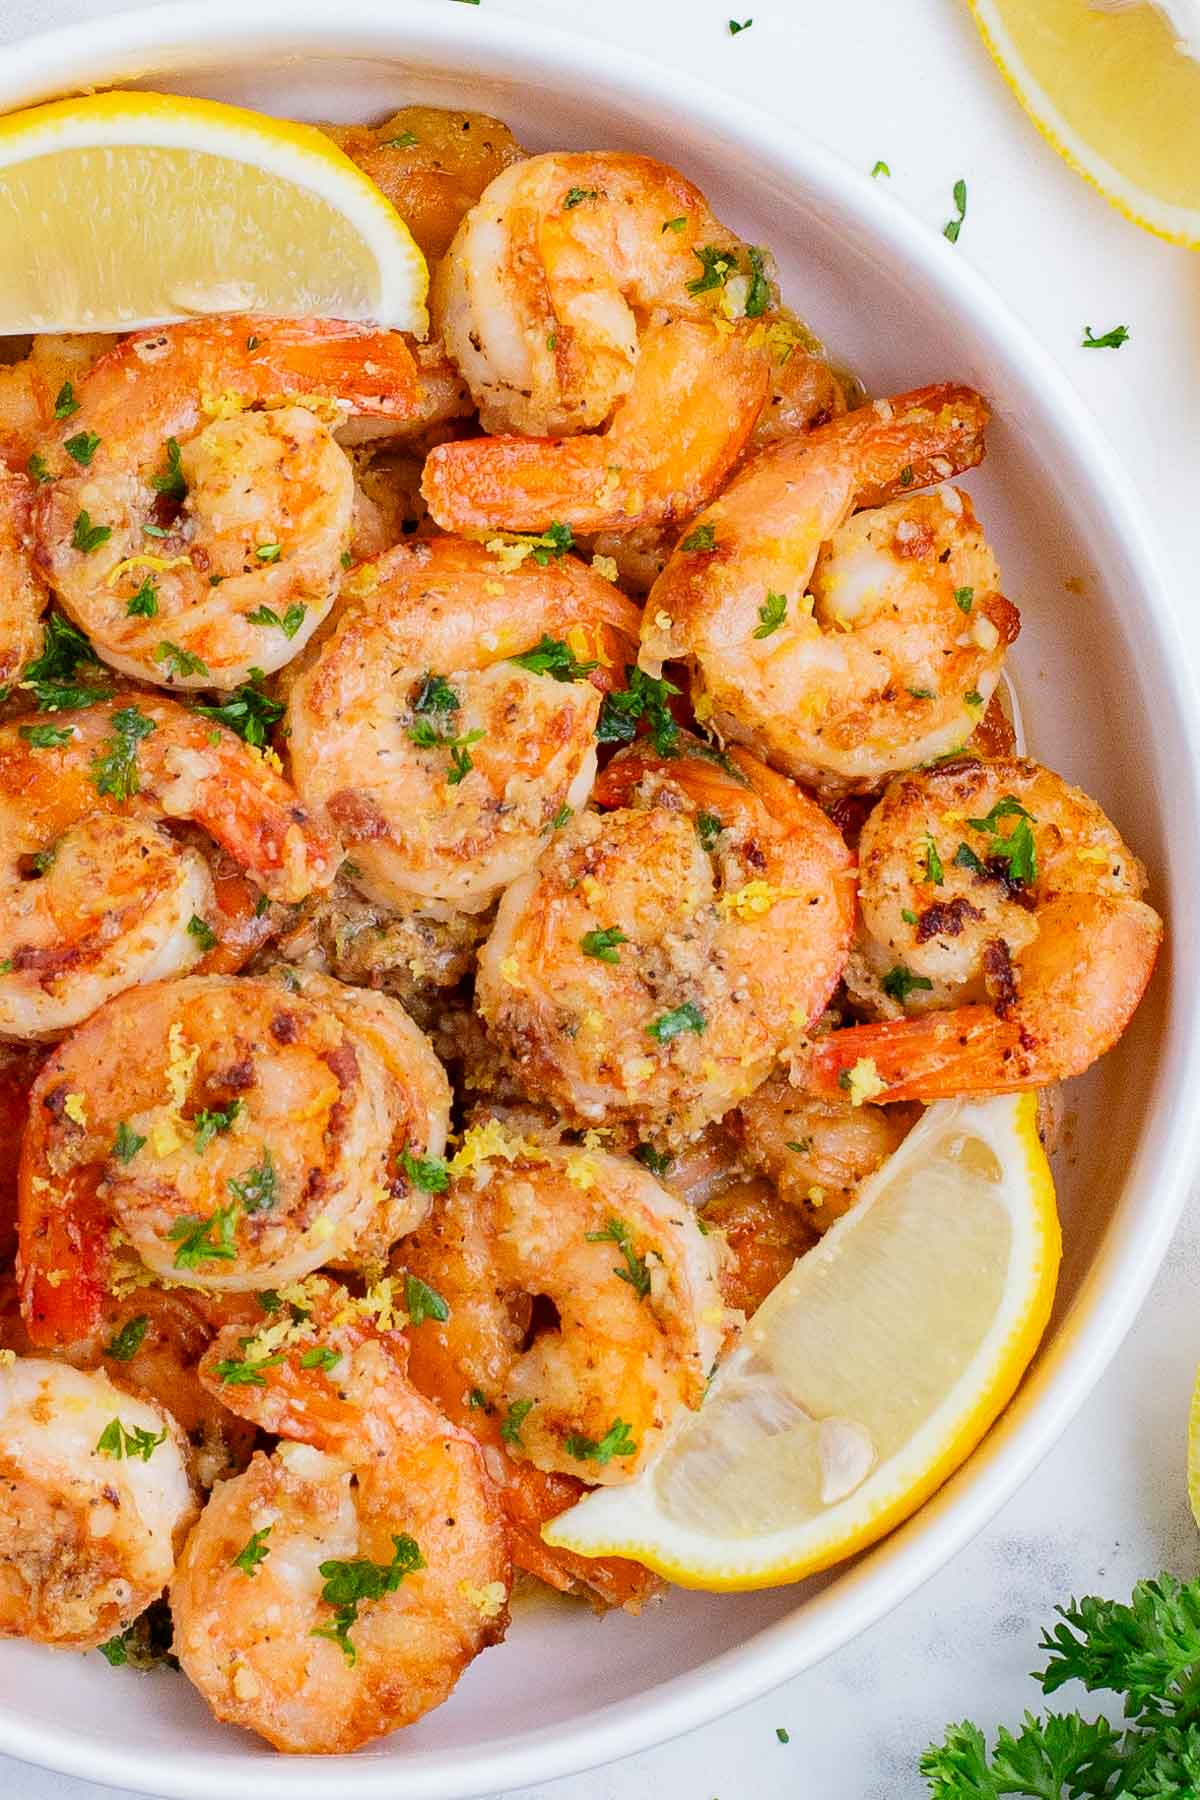 Garlic butter shrimp is a quick and easy weeknight dinner recipe.